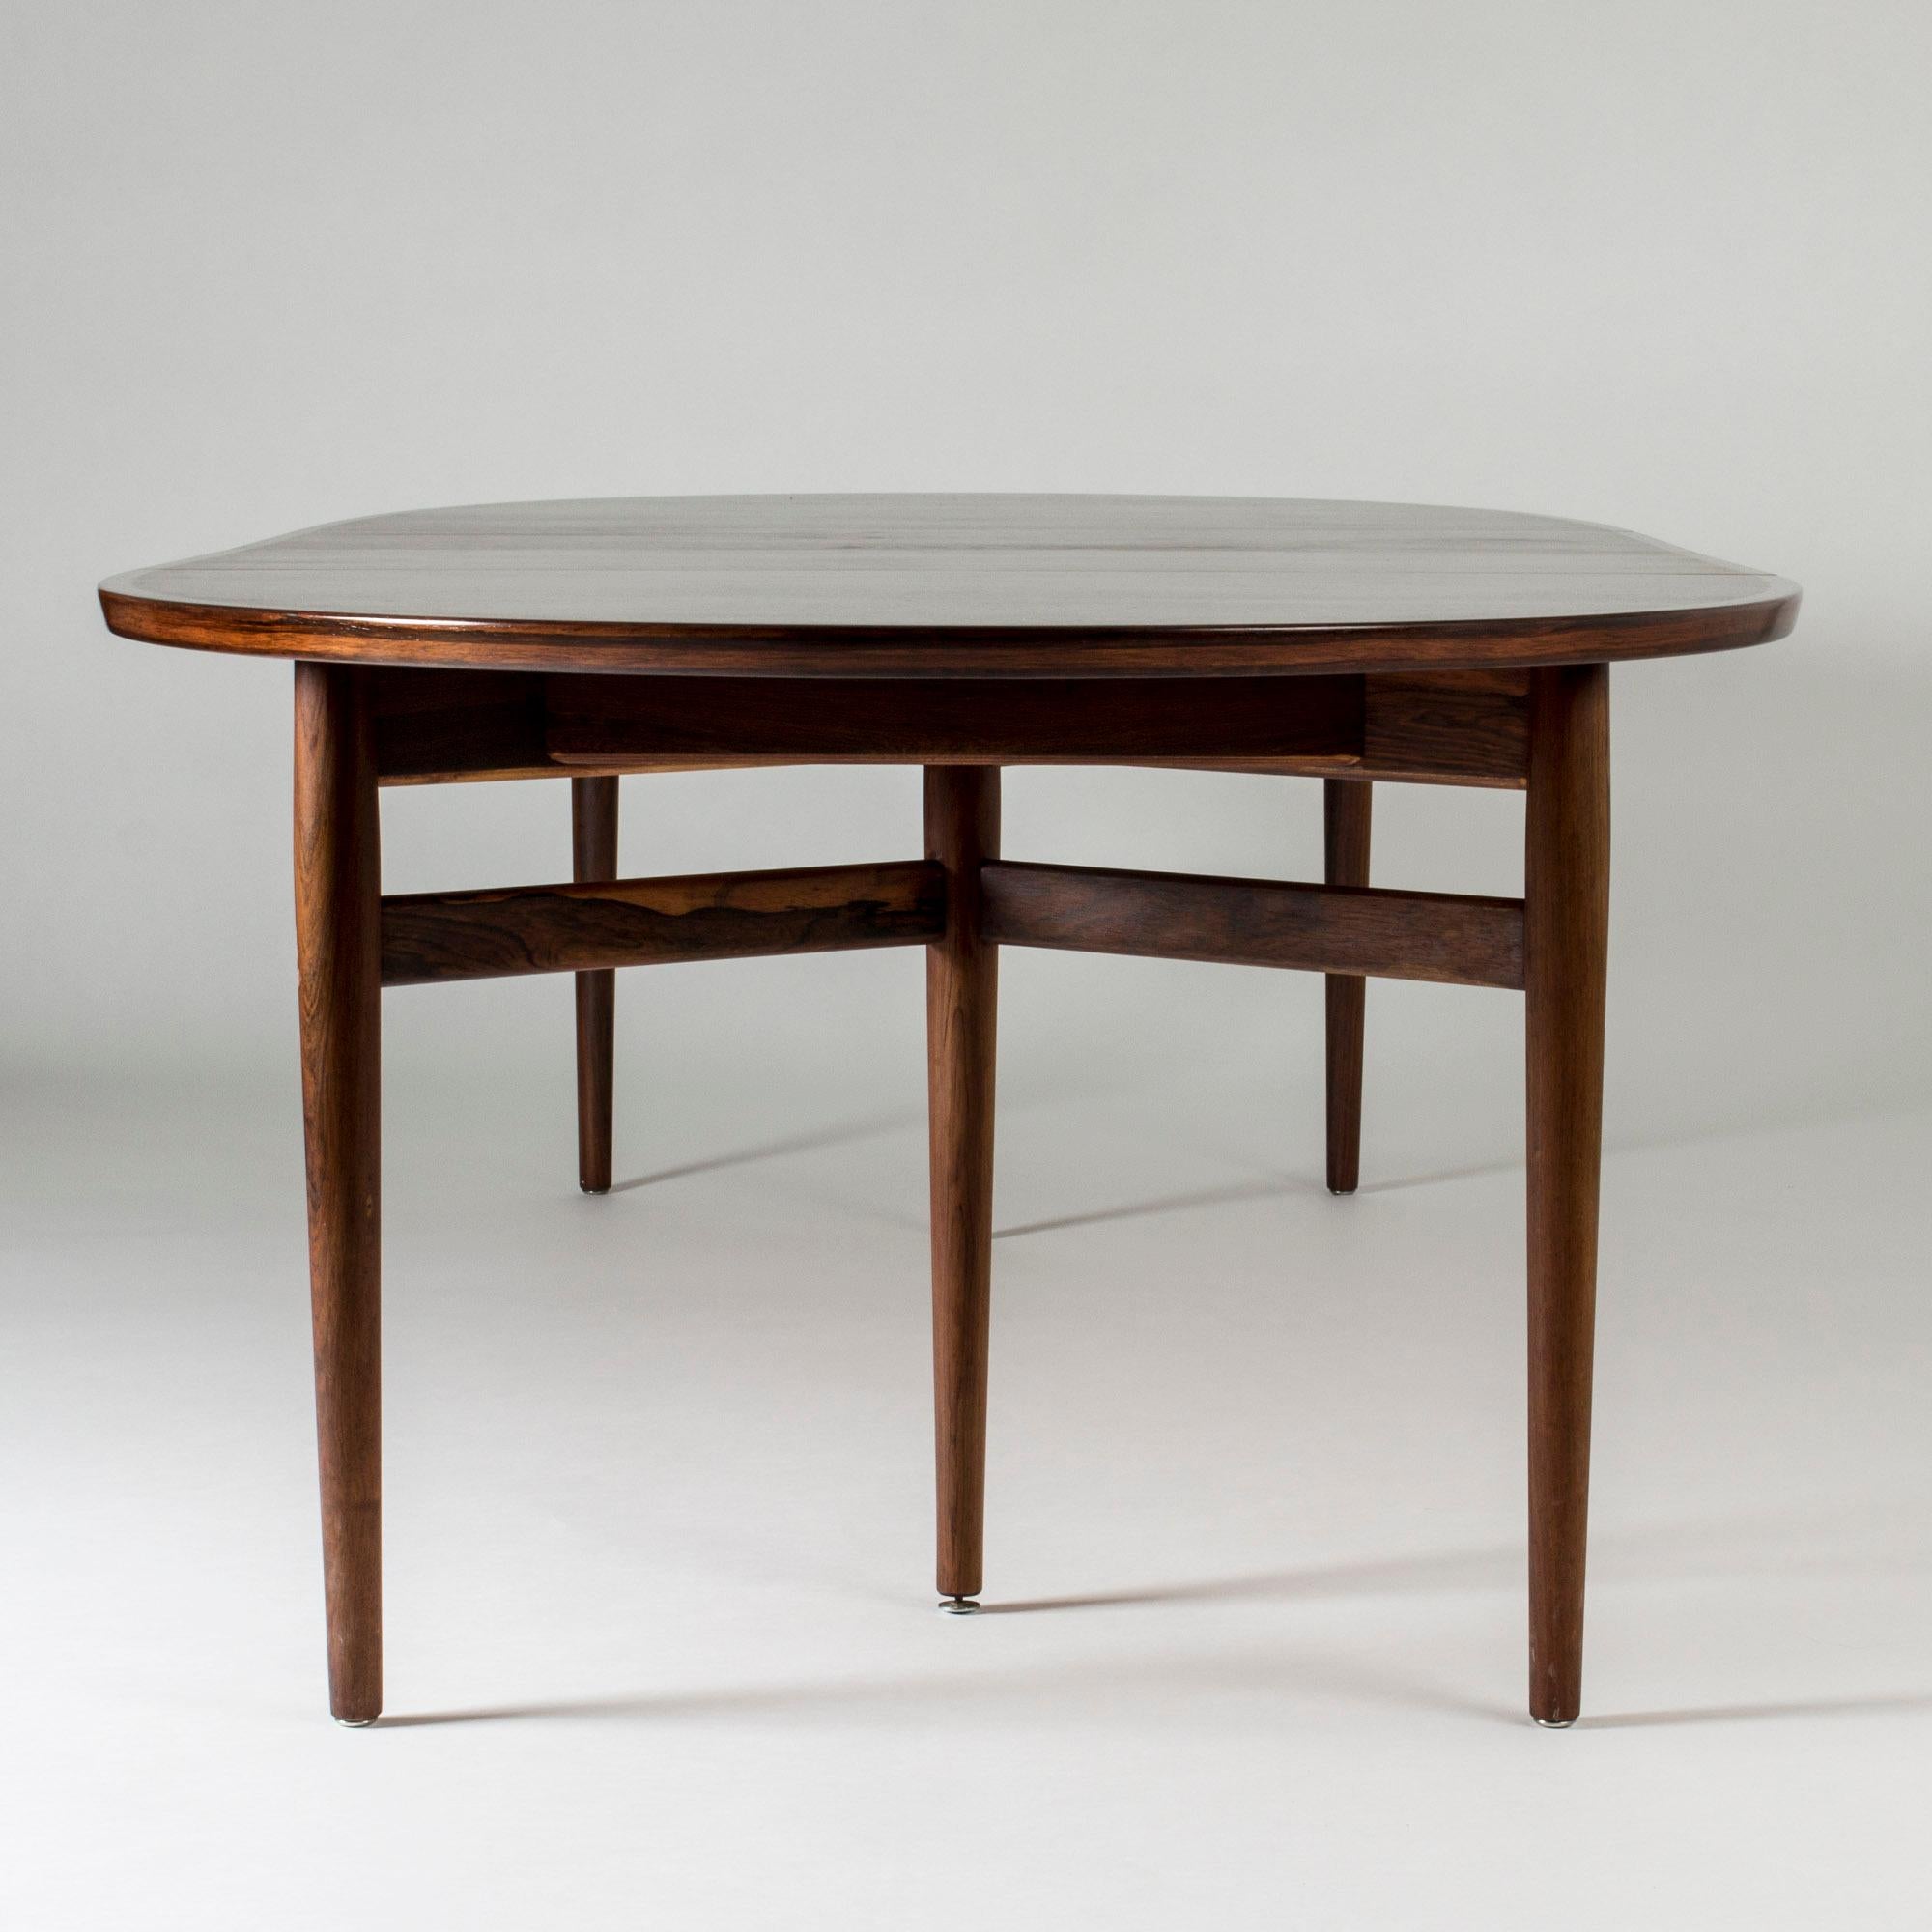 Rosewood Oval Dining Table with Extension Leaves by Arne Vodder